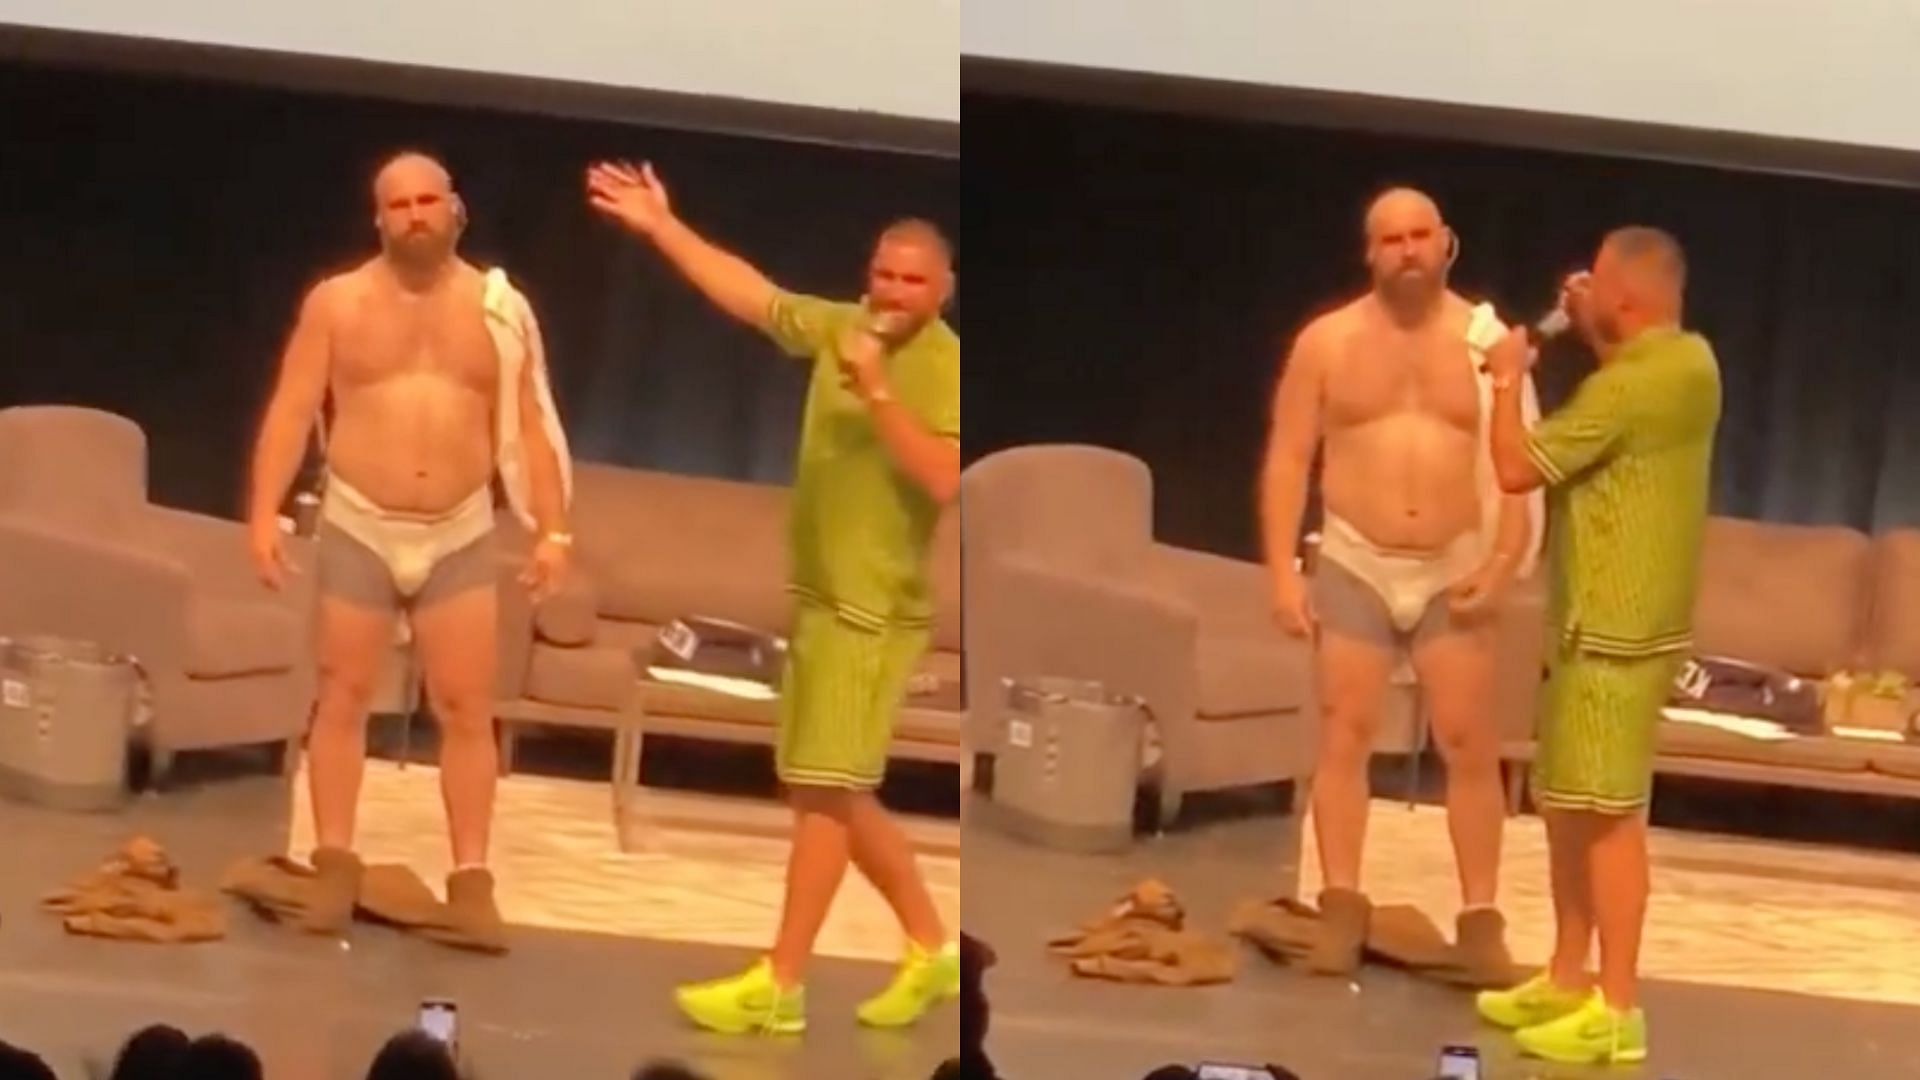 Jason Kelce with a bald head and wearing a diaper. Credit: @newheightsshow (IG)